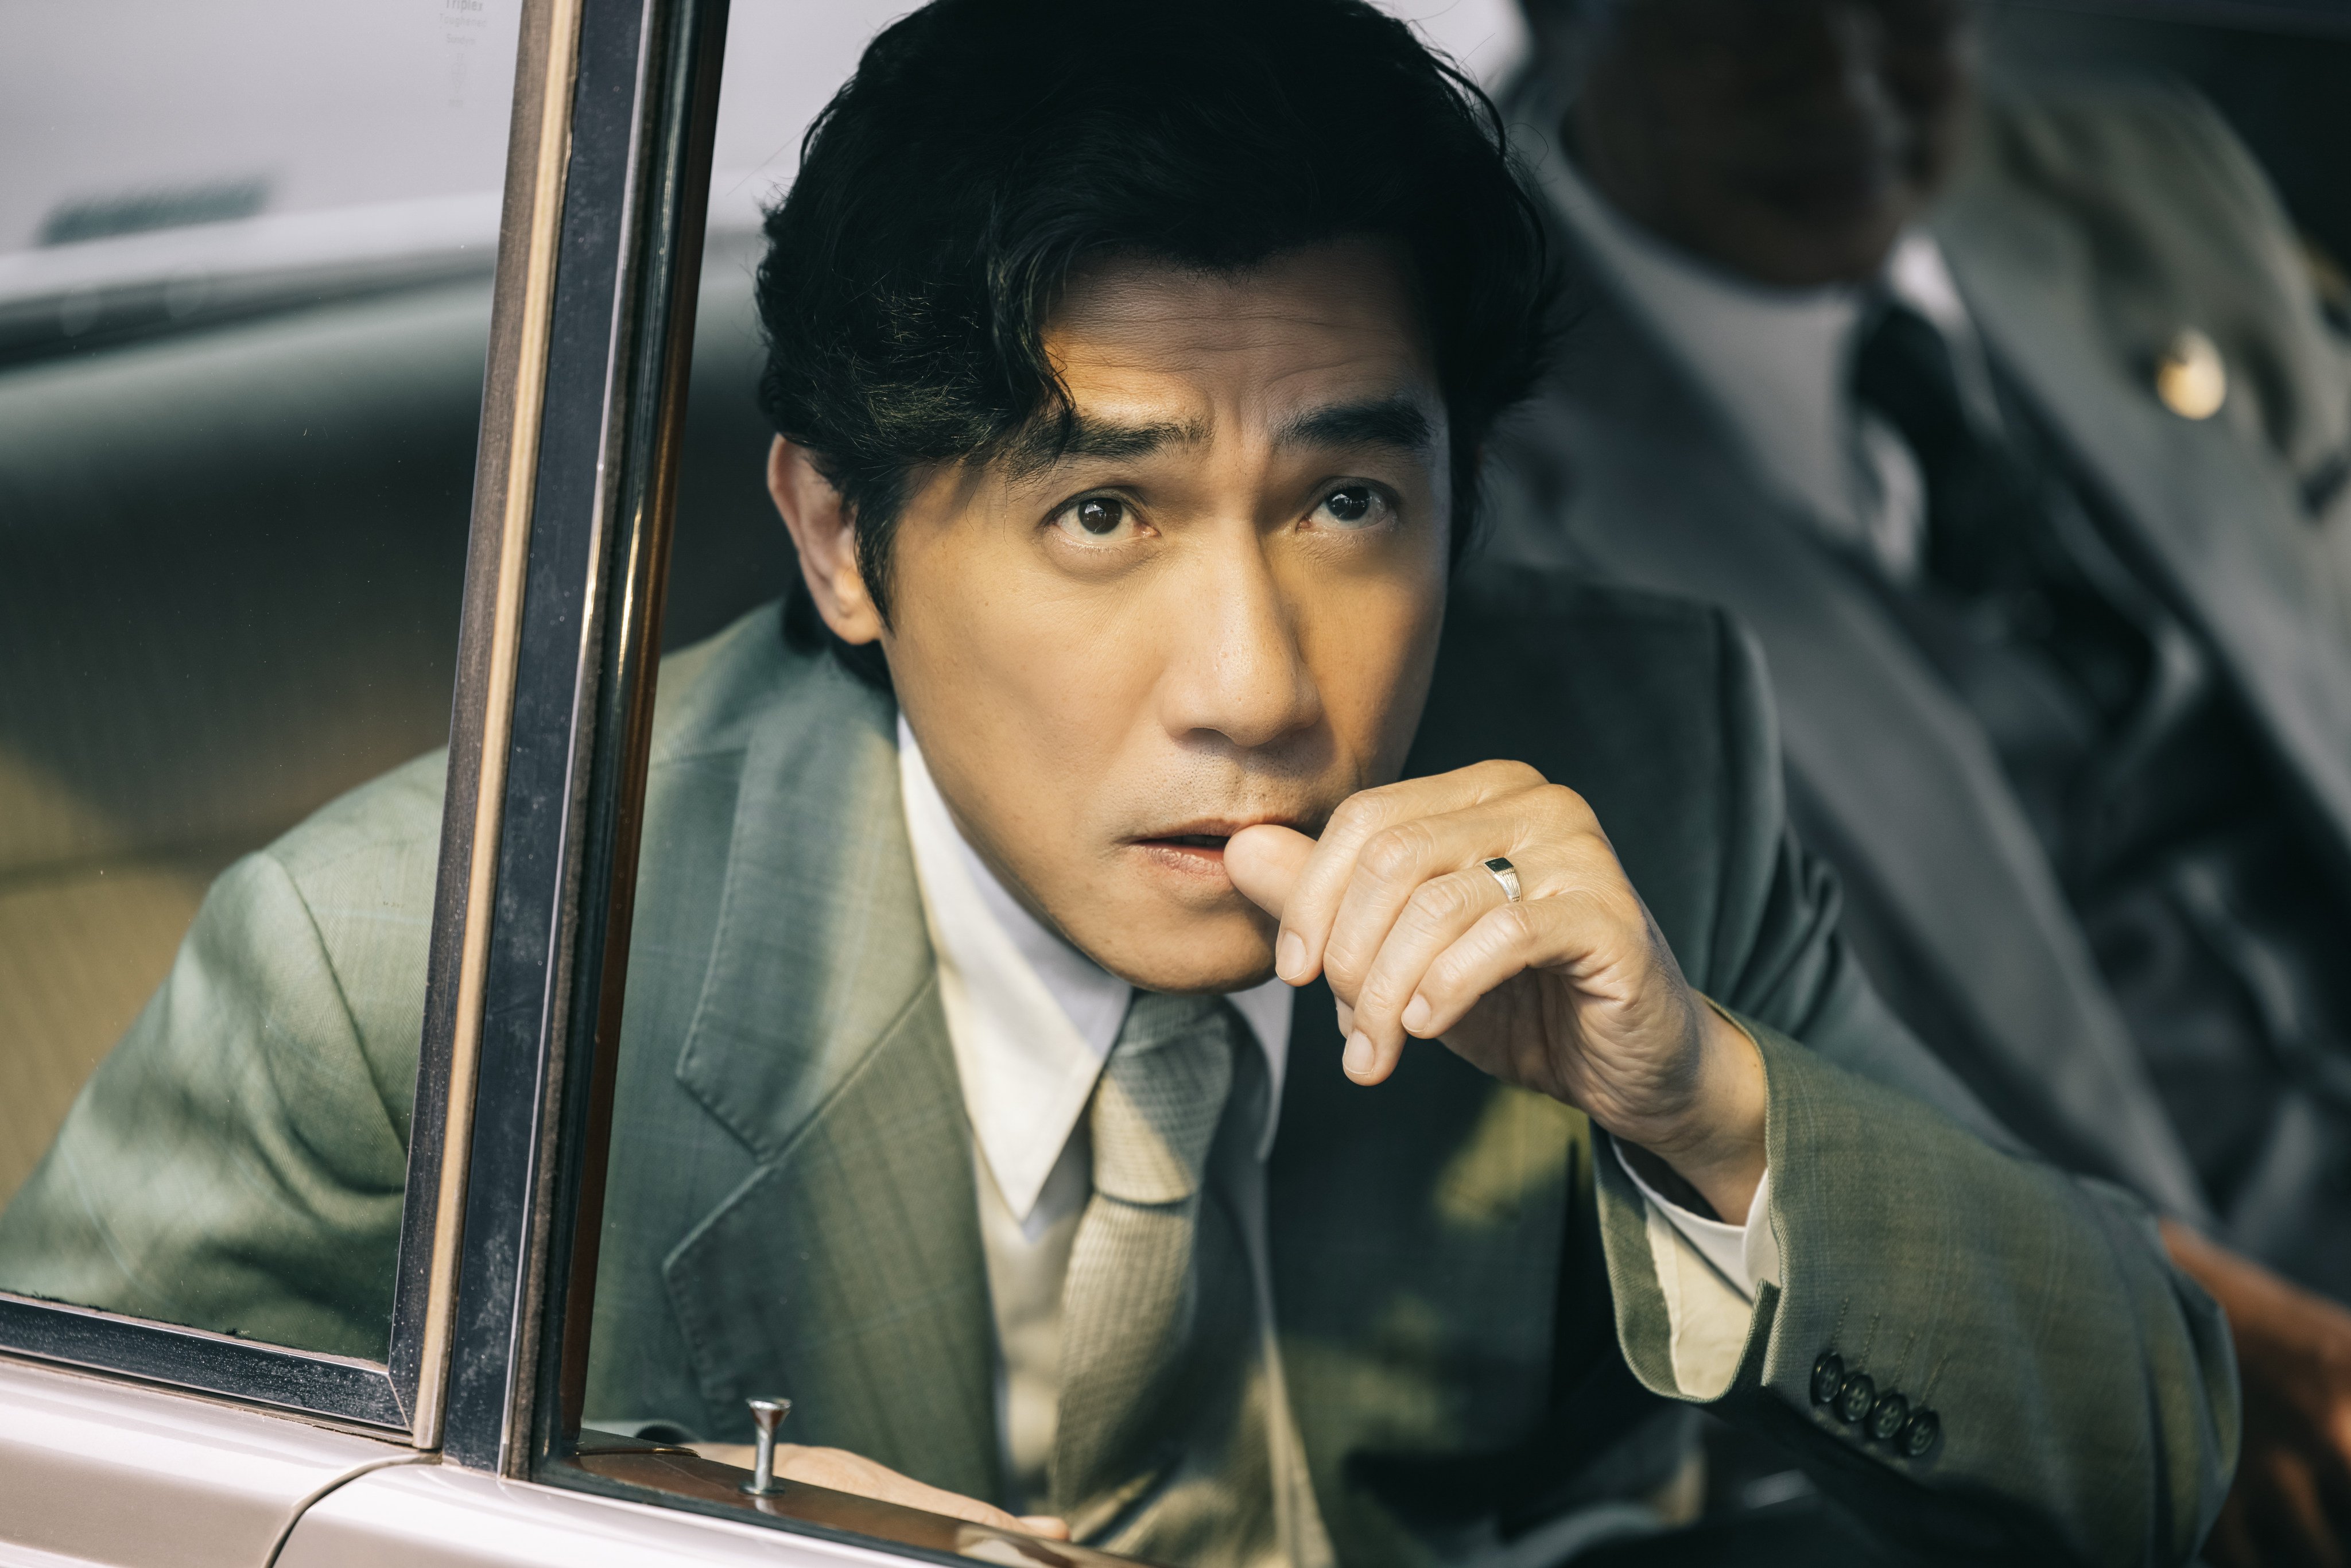 Tony Leung Chiu-wai in a still from “The Goldfinger”.